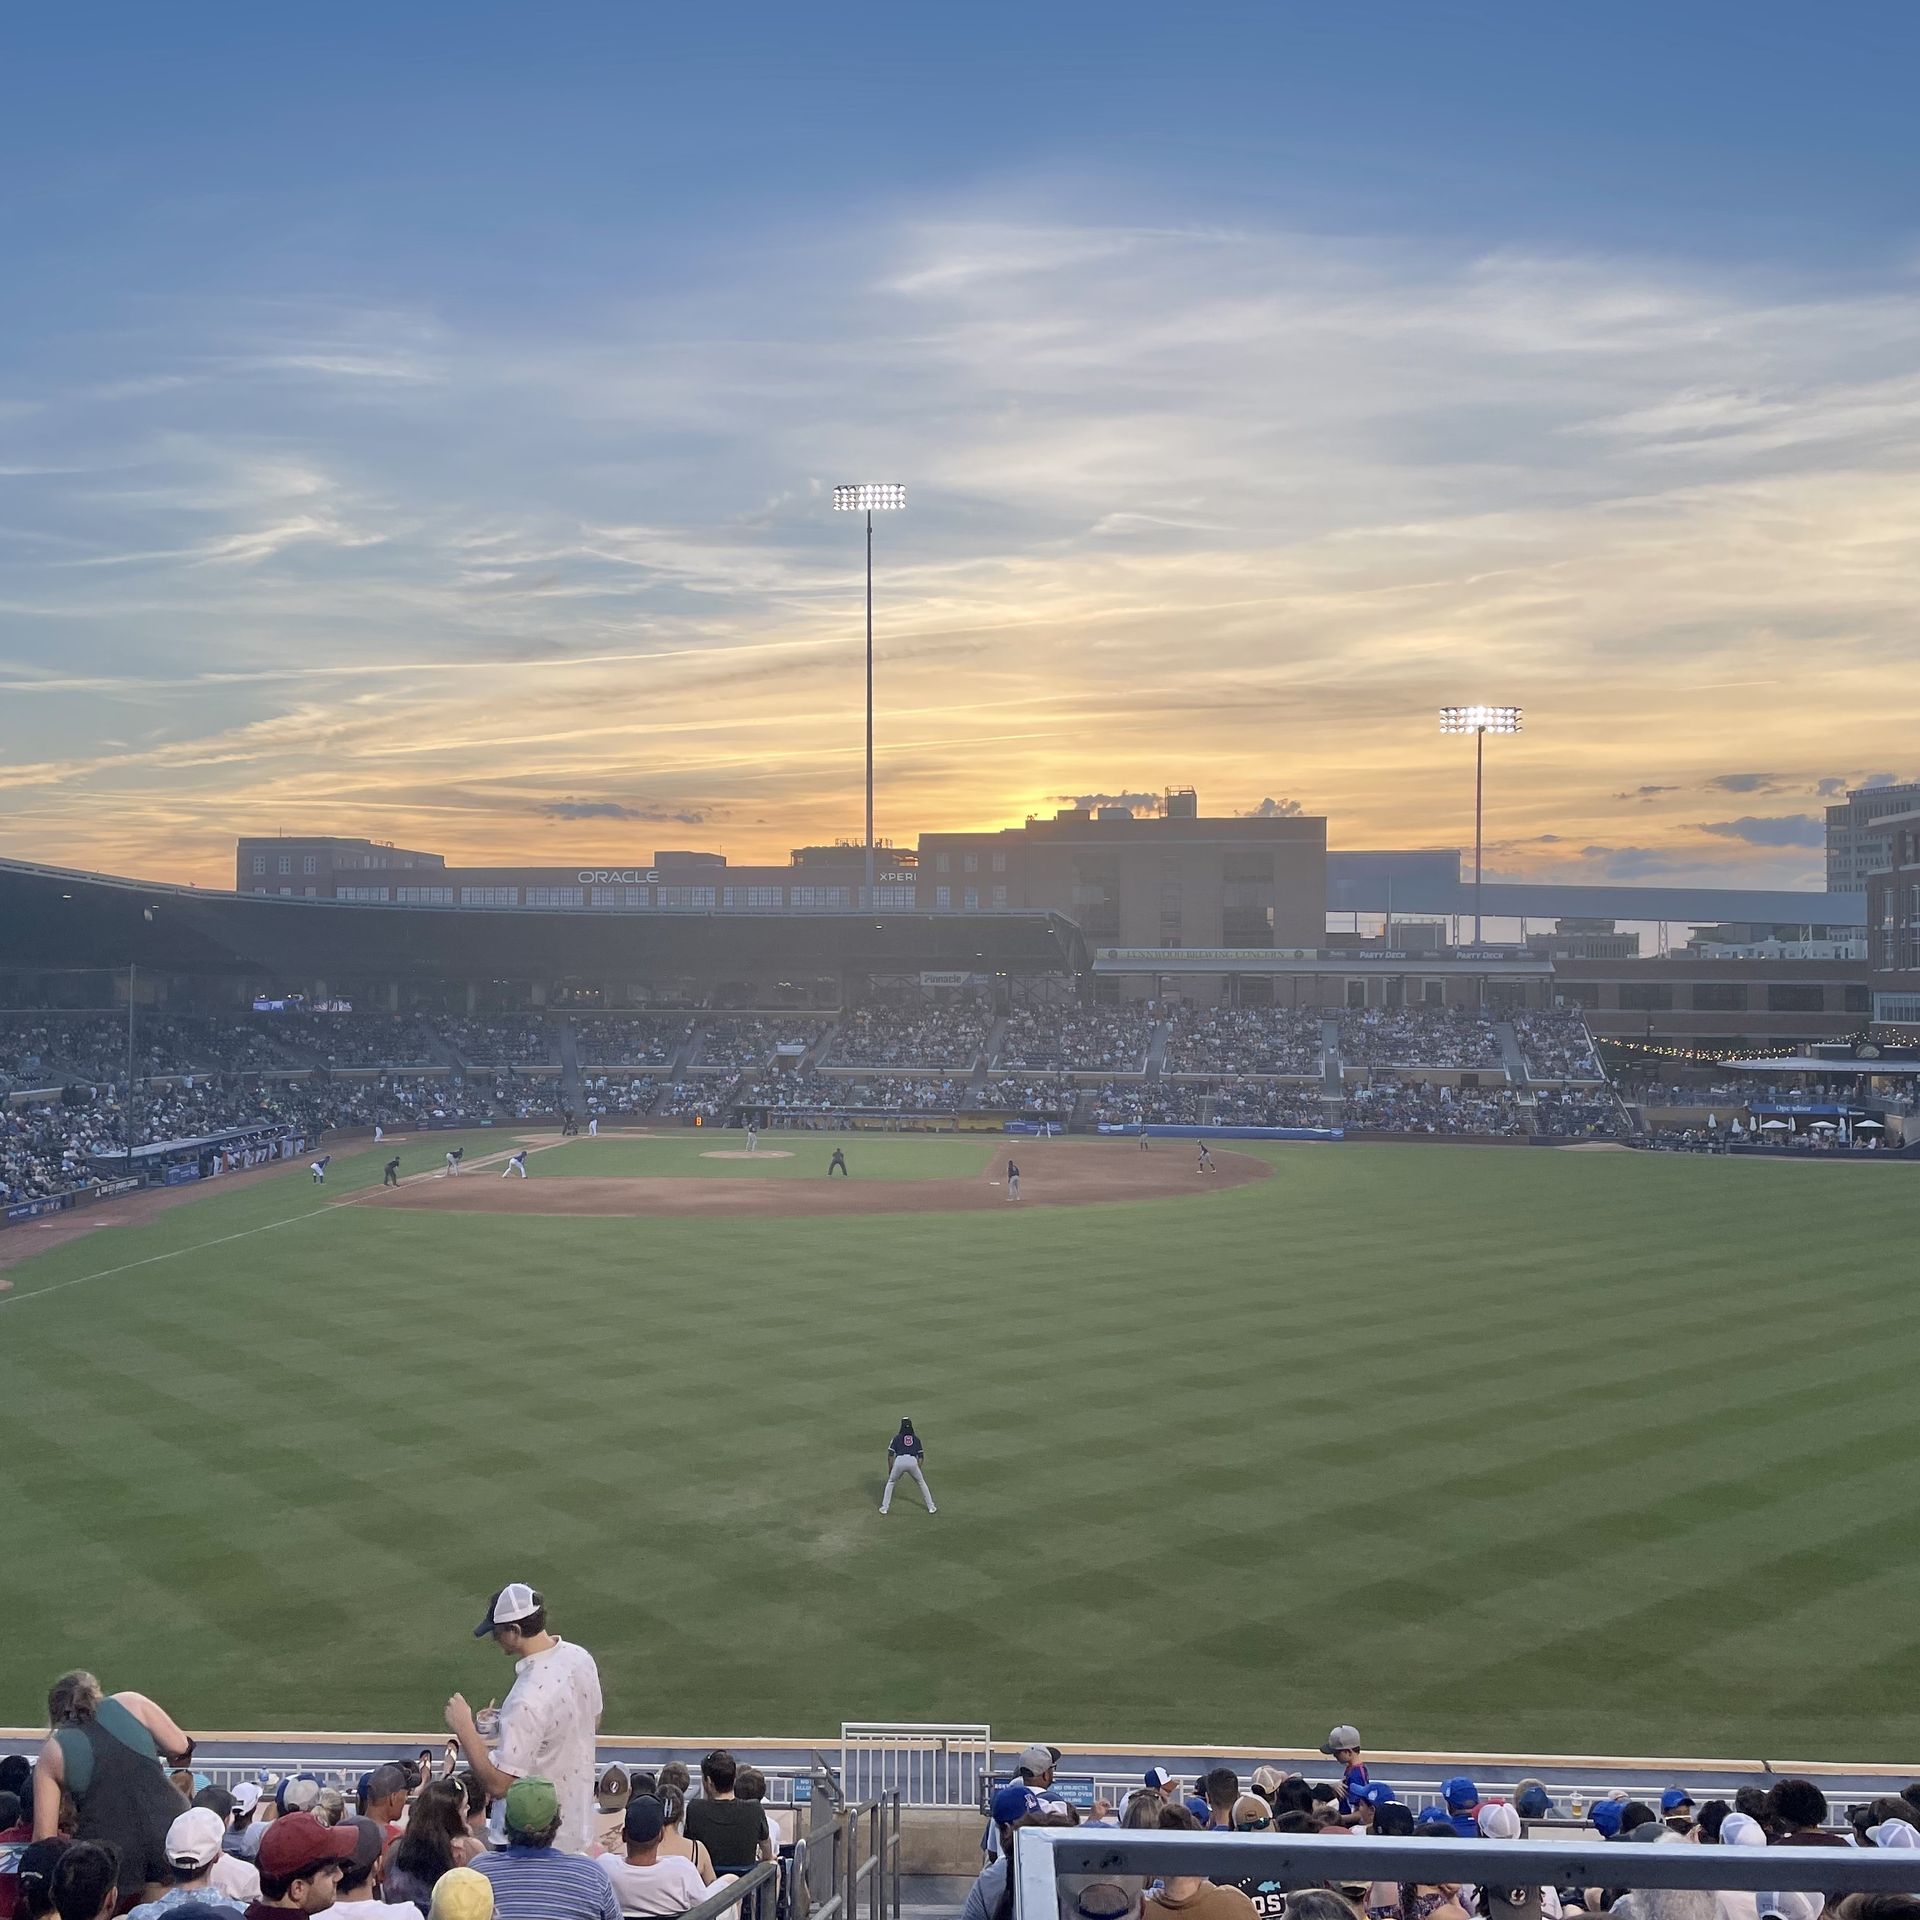 Durham Bulls on X: It's National Retro Day, which is a great